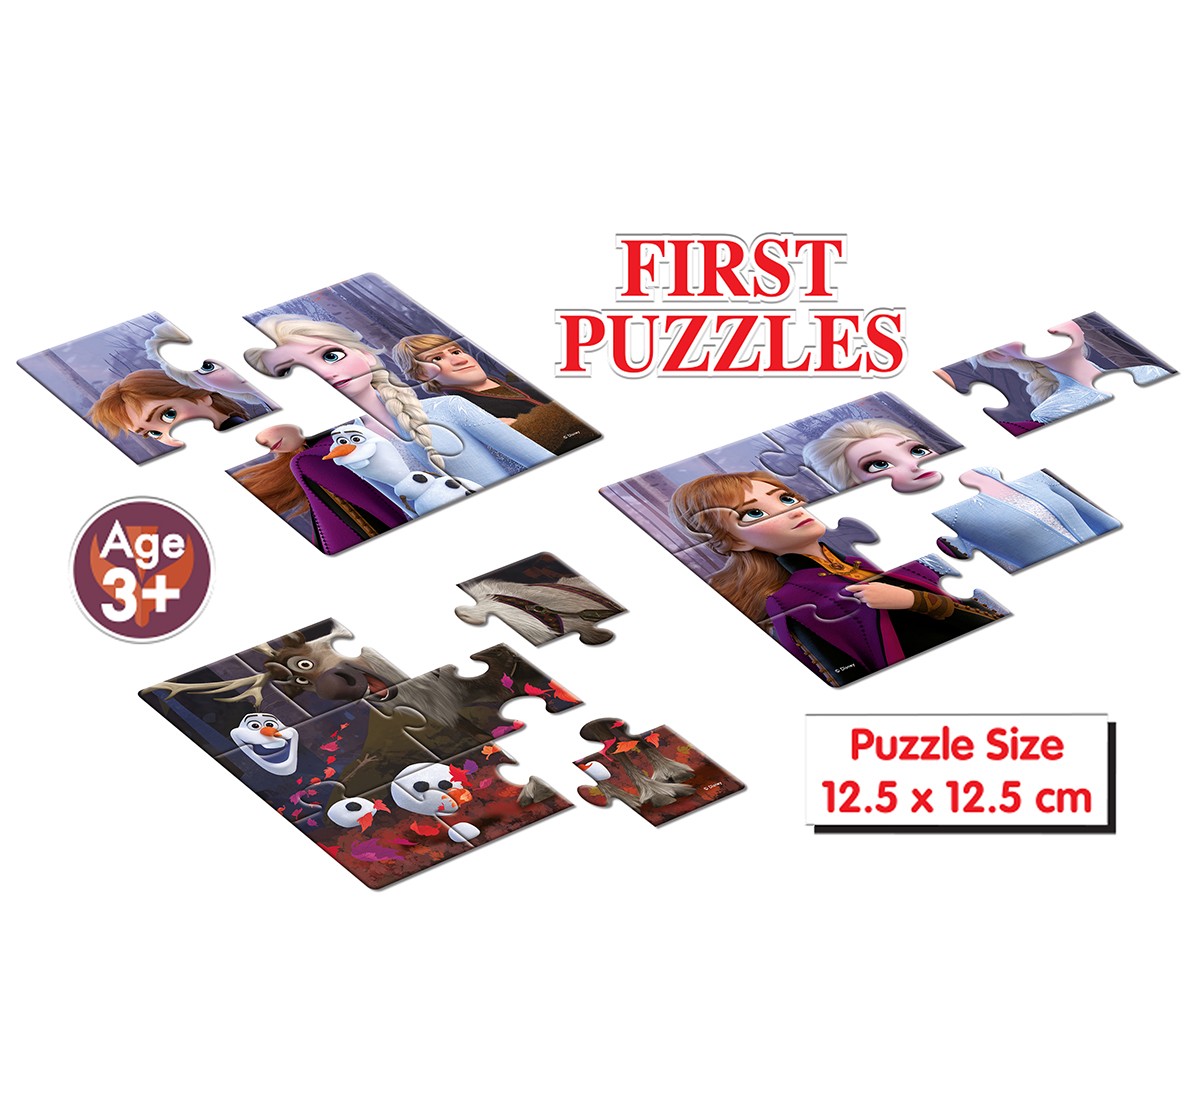 Frank Disney Frozen Ii  First Puzzles Pack 3 for Kids age 3Y+